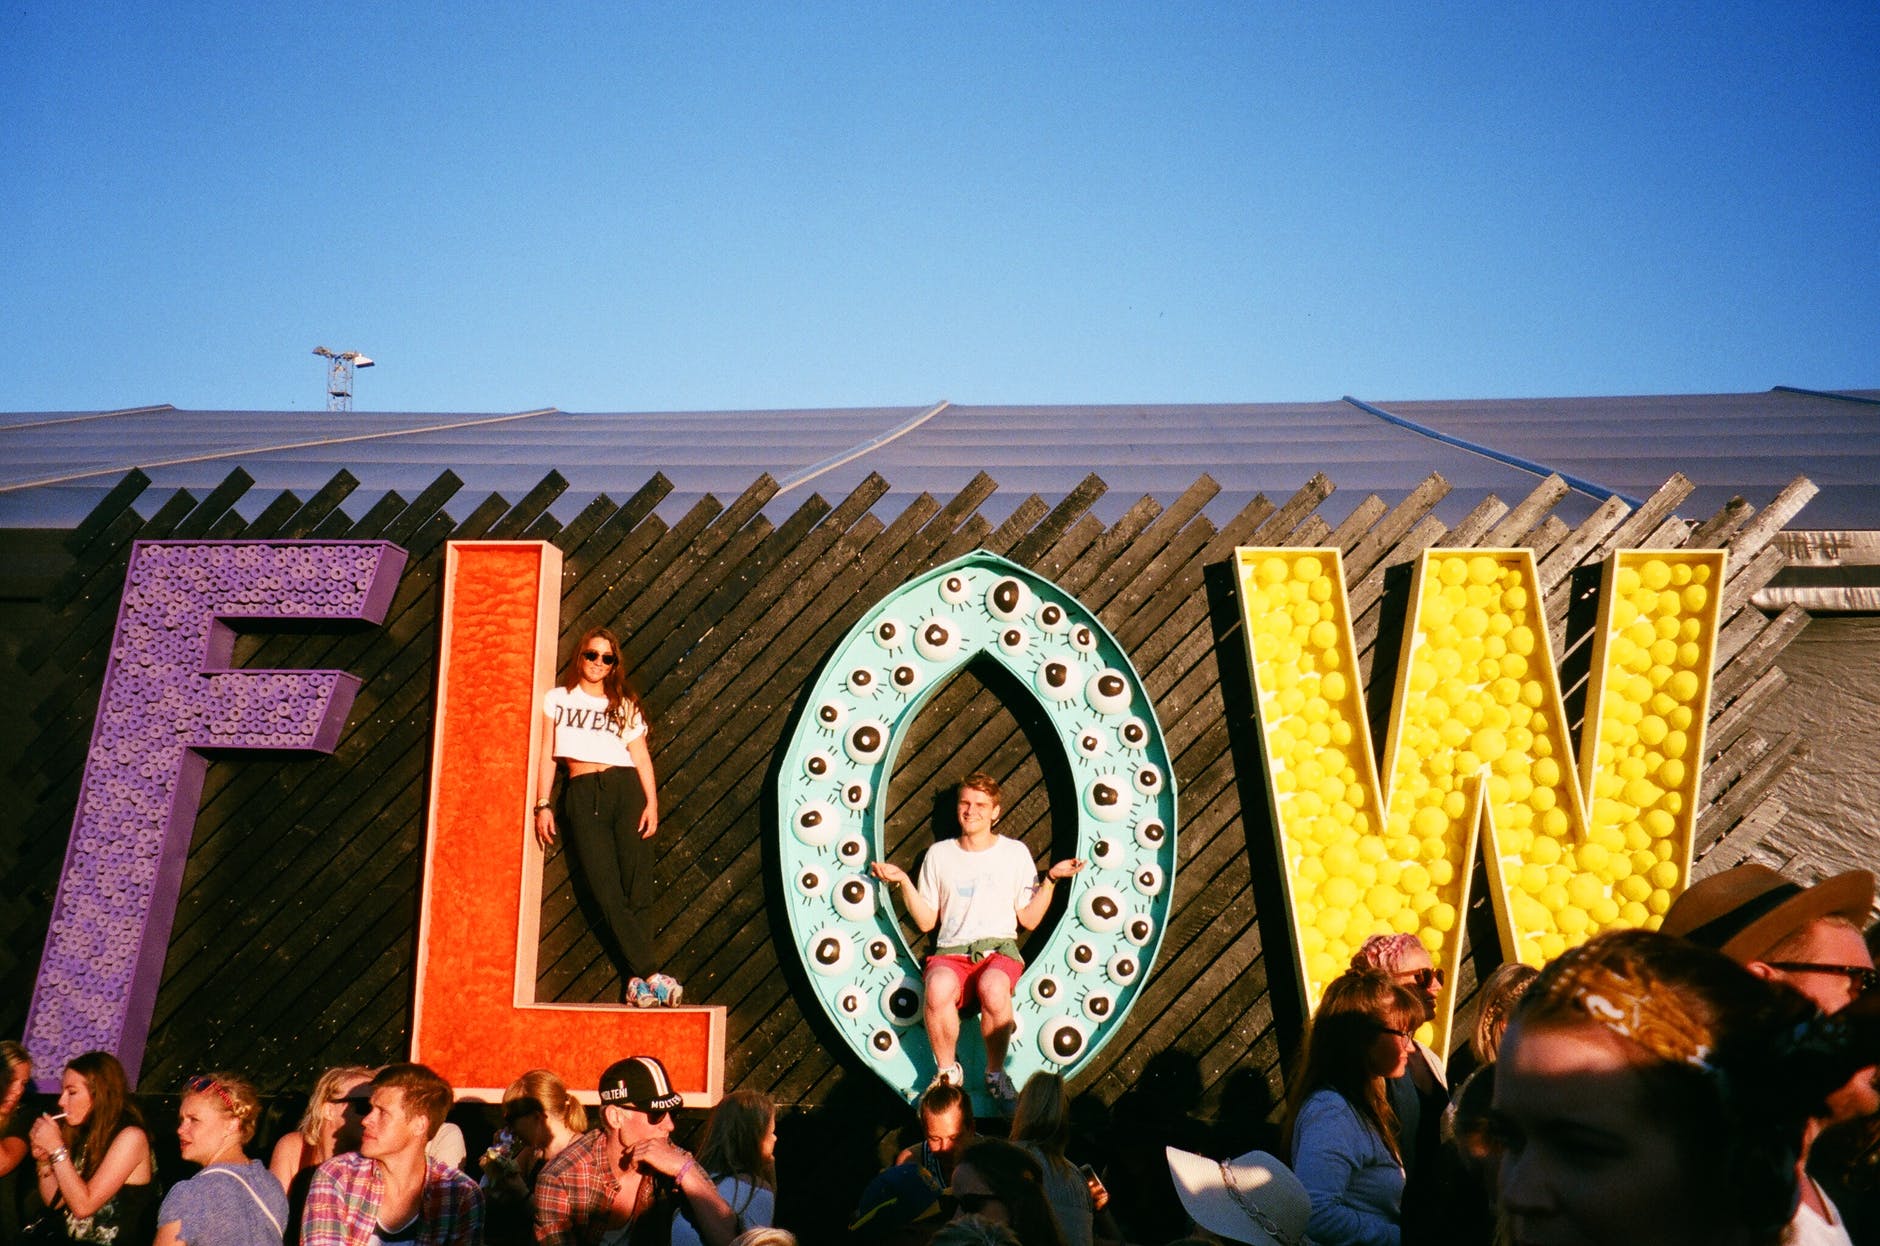 The word 'flow' in giant metal letters at a festival